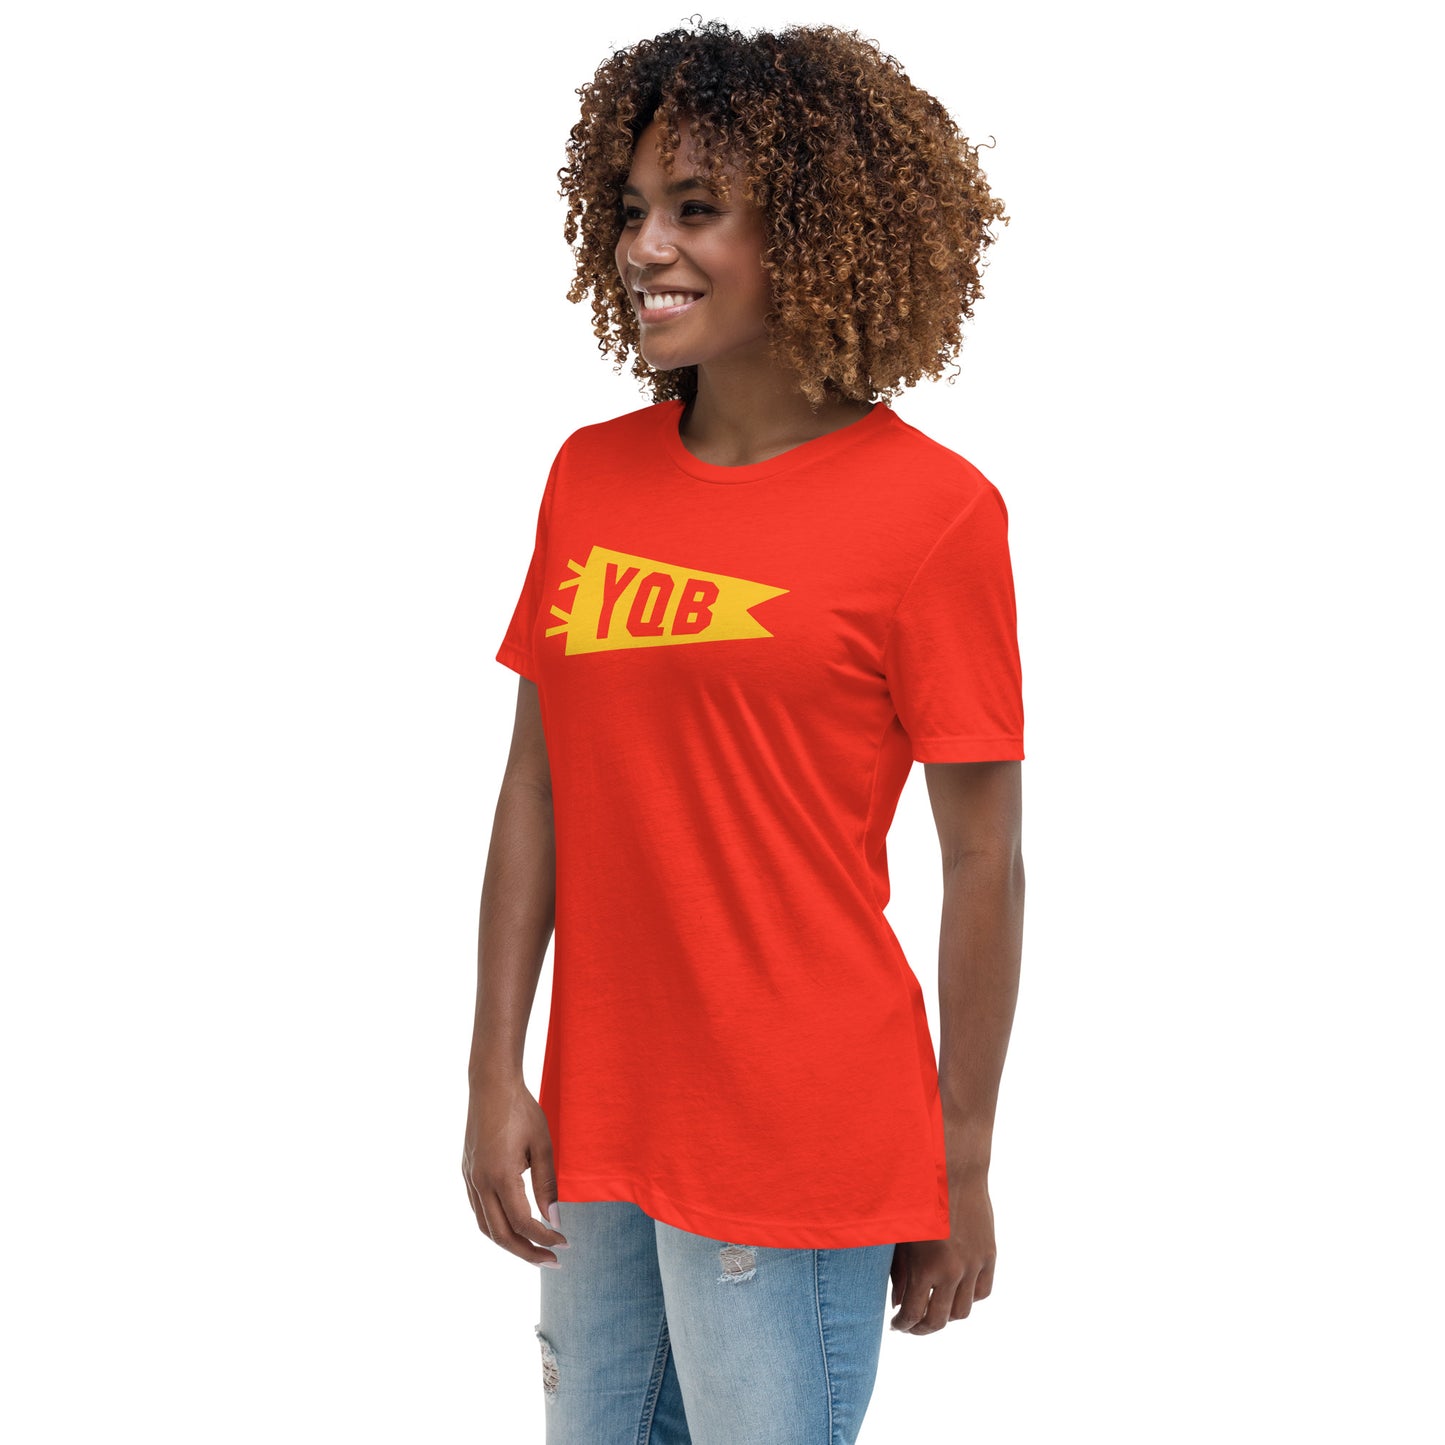 Airport Code Women's Tee - Yellow Graphic • YQB Quebec City • YHM Designs - Image 04